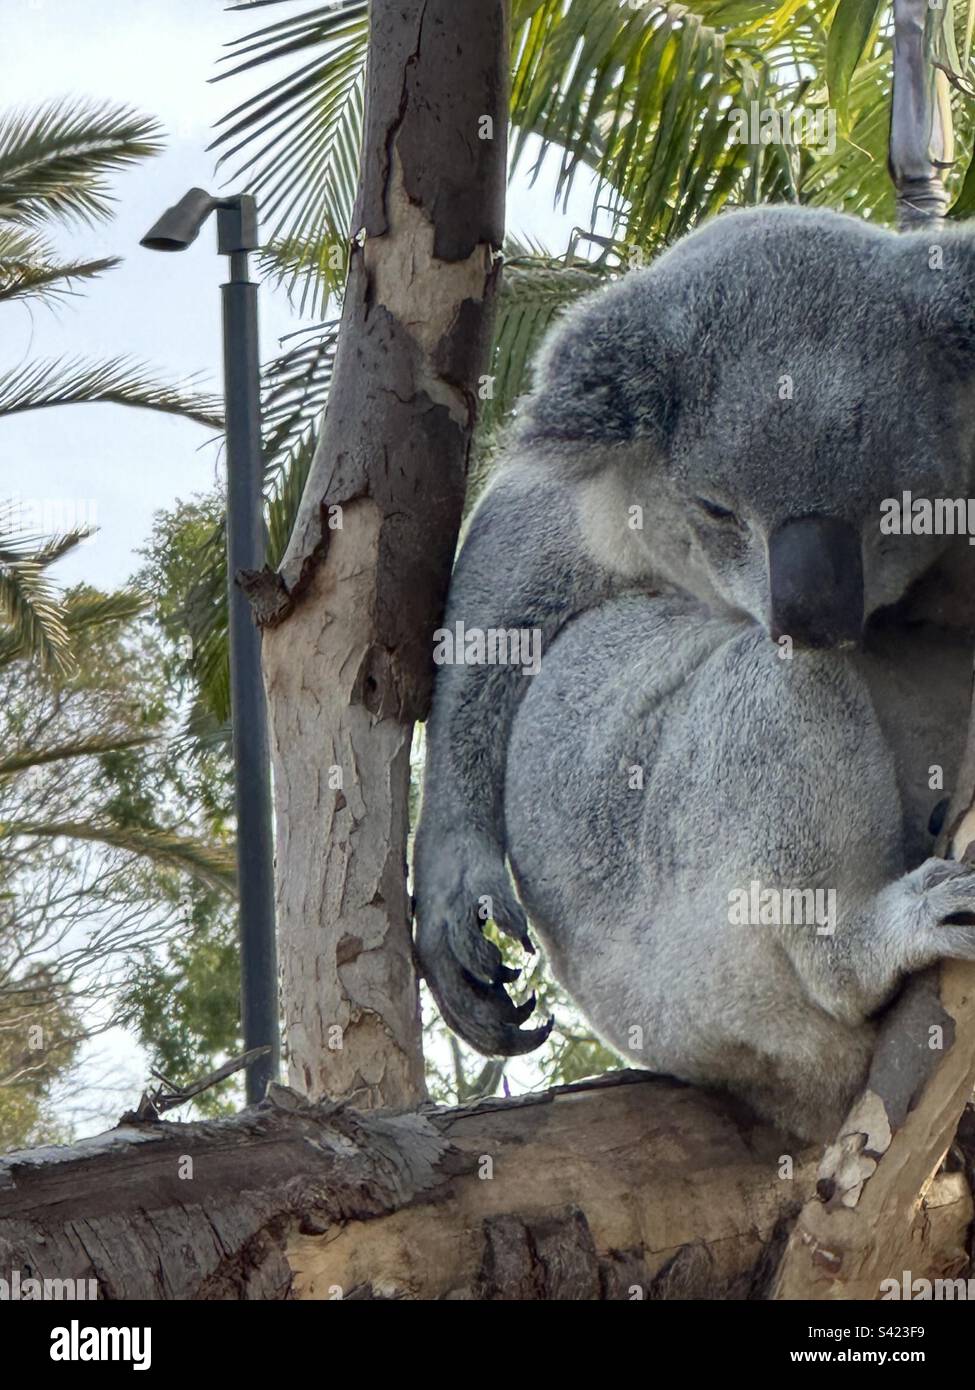 Koala in a tree at San Diego Zoo in Balboa Park, San Diego, one arm hanging limply at its side with claws clearly visible. Stock Photo